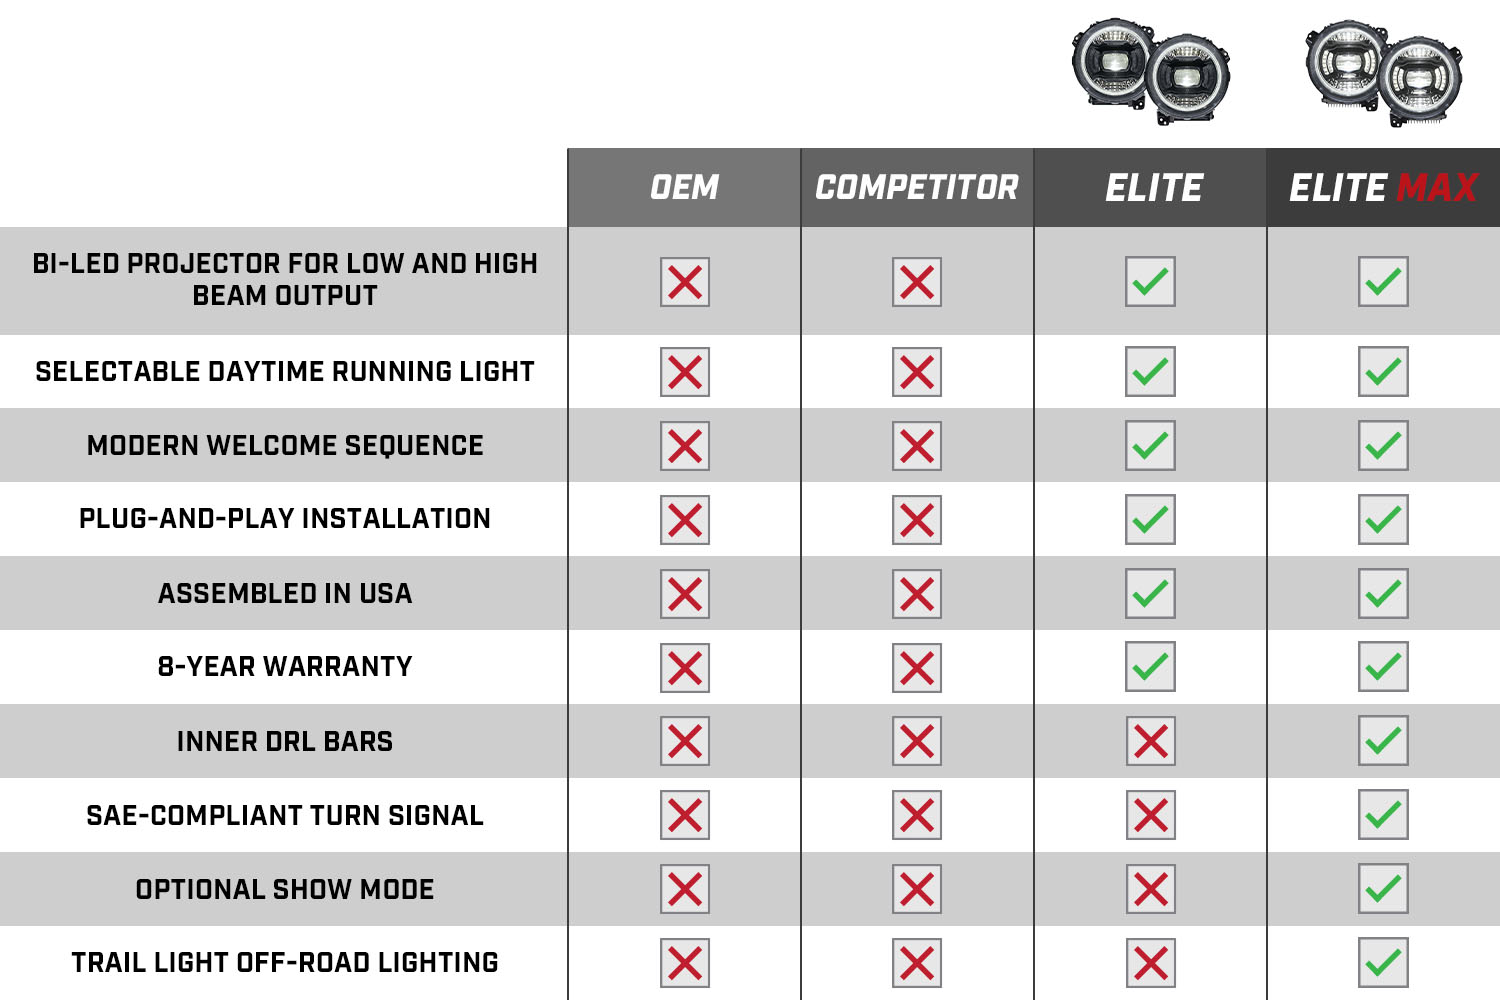 Elite Series Product Features Check Box